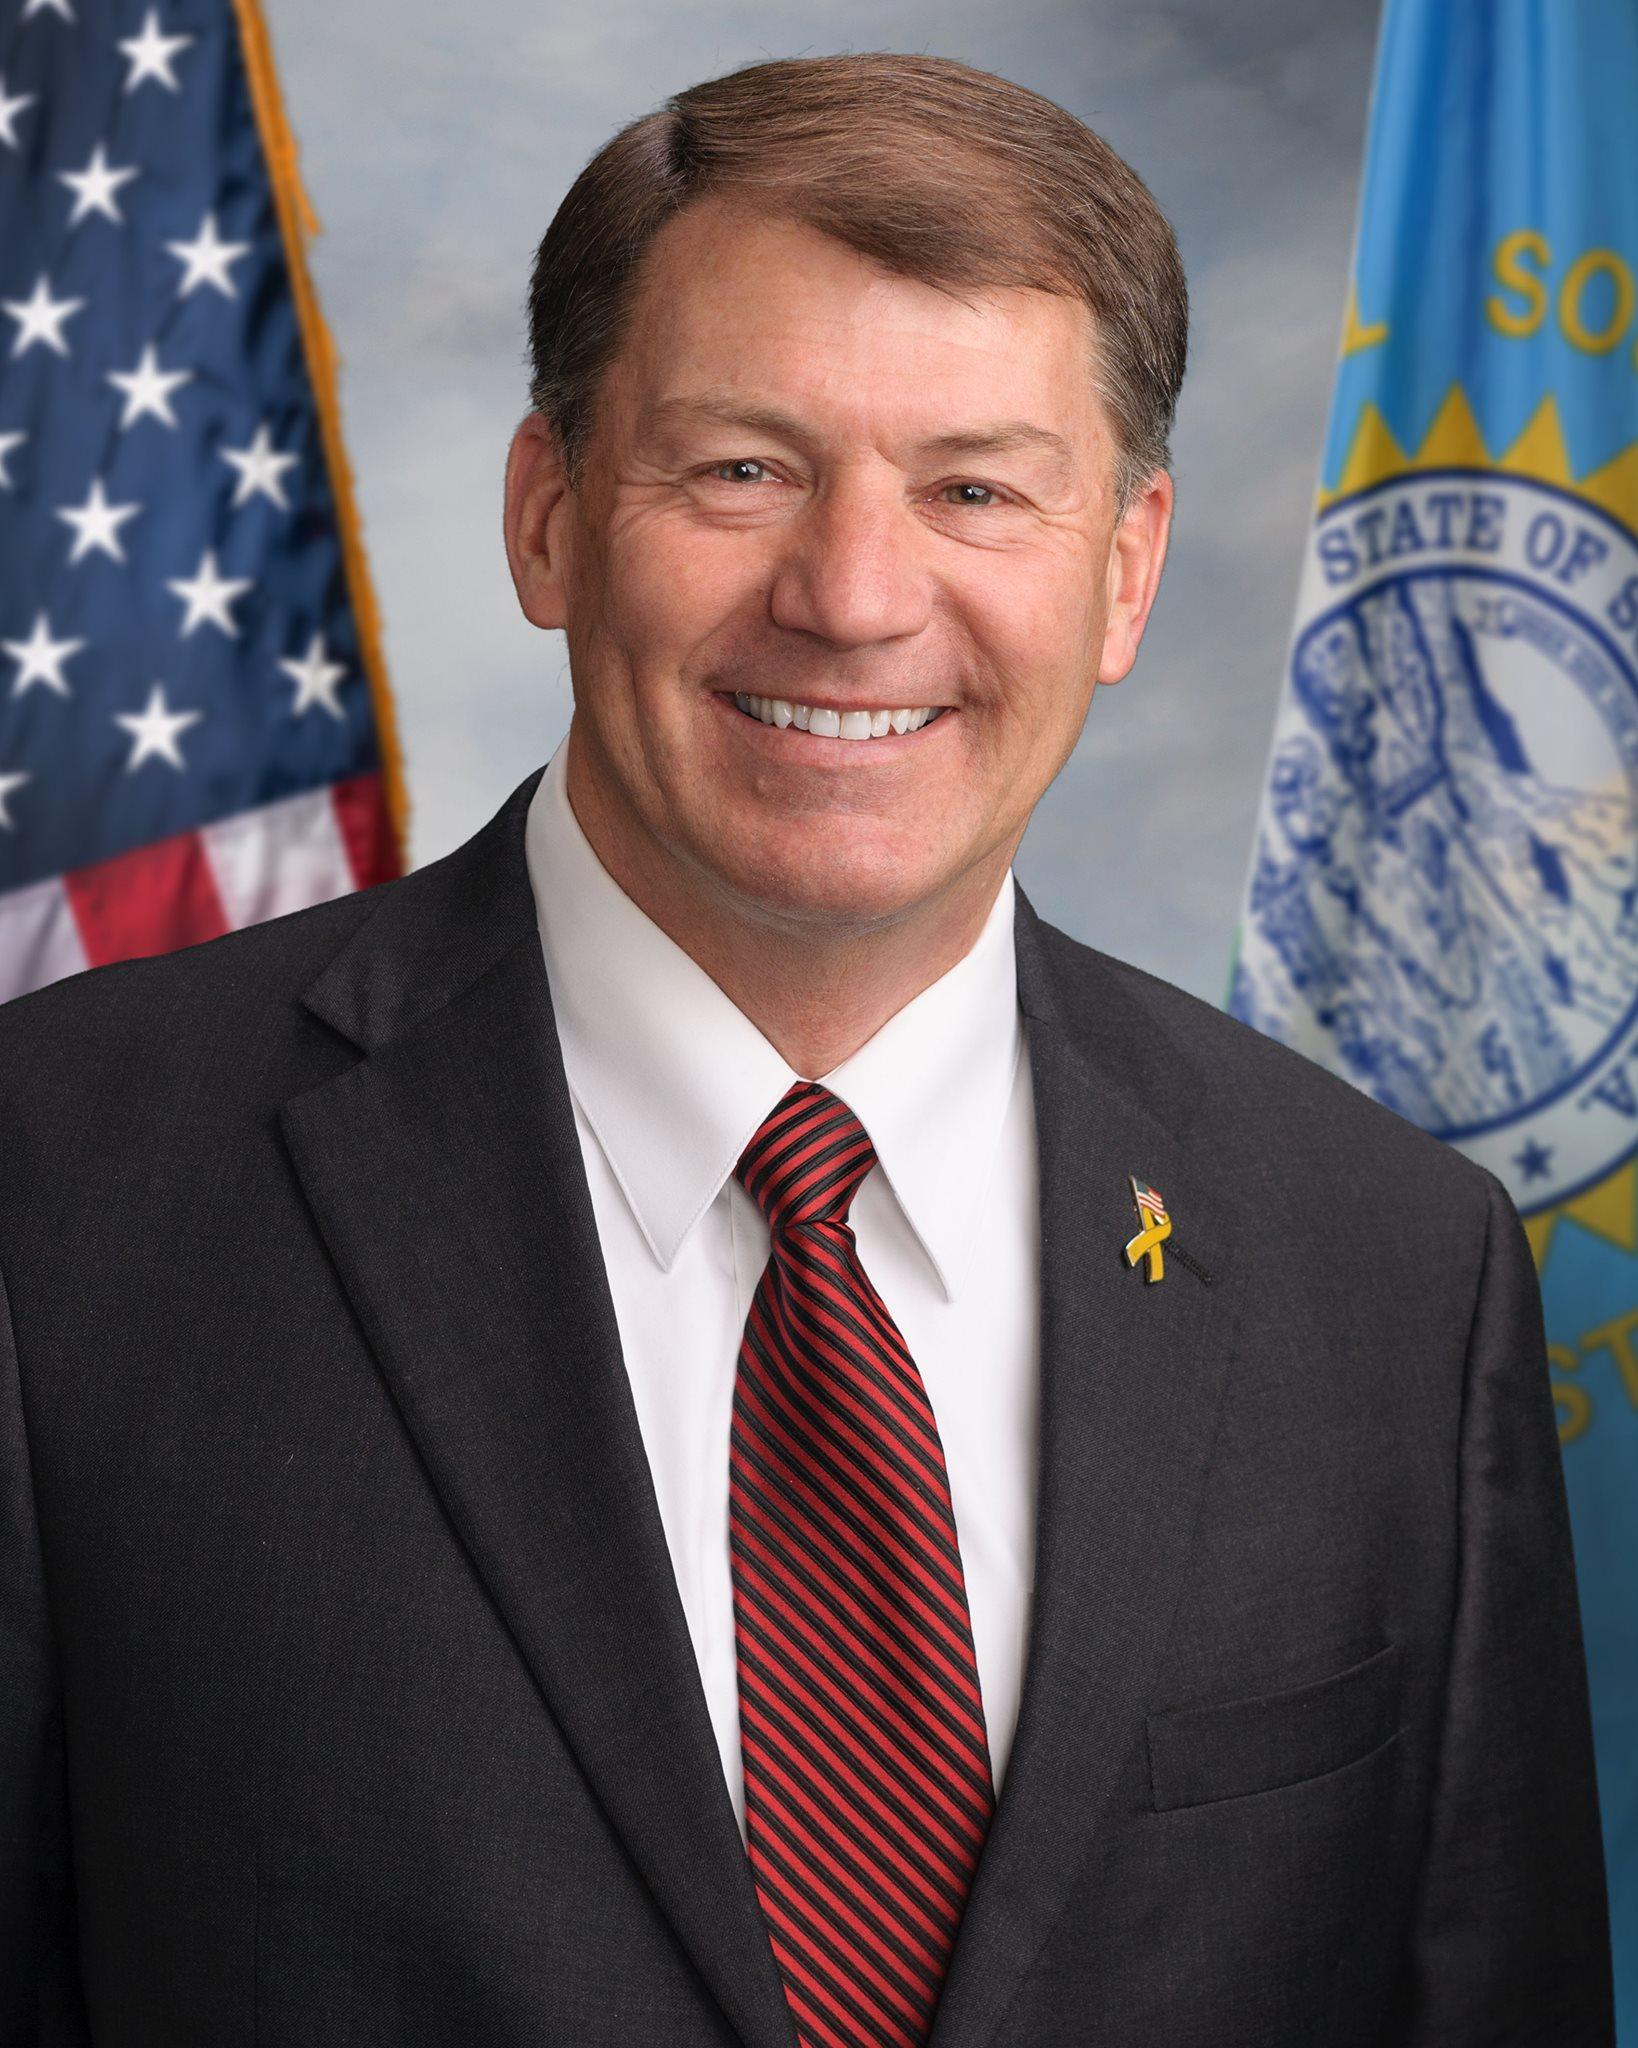 Portrait of Senator Rounds with US and SD flags